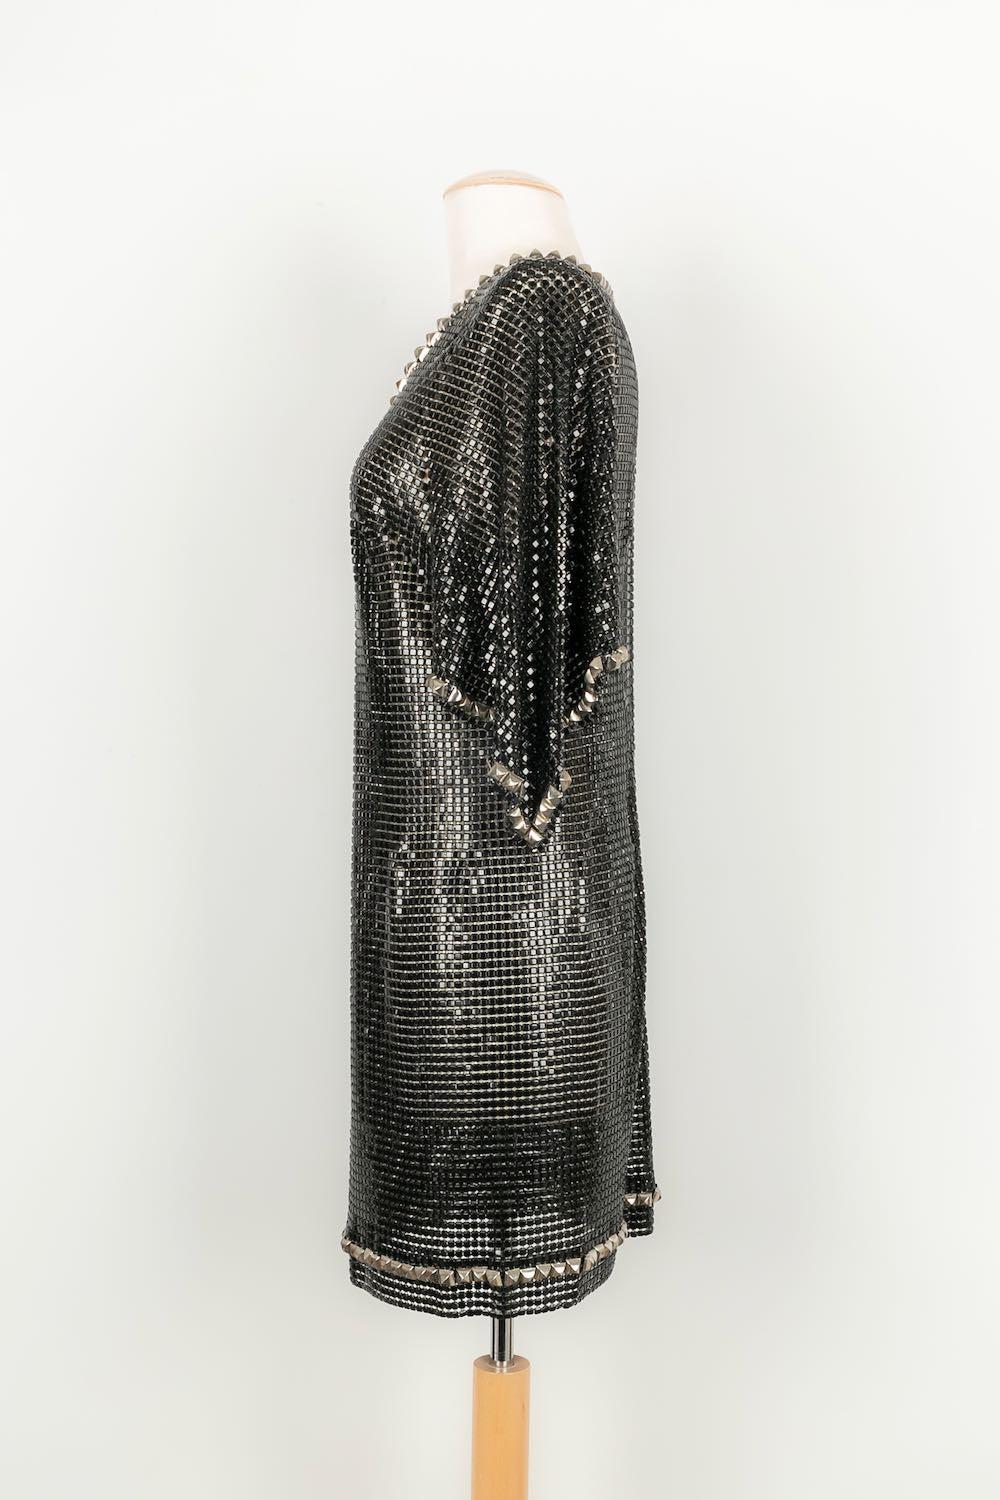 Paco Rabanne - Mini dress in metallic mesh. No size or composition label, it fits a 36FR.

Additional information: 

Dimensions: 
Shoulder width: 37 cm, Chest: 42 cm, Sleeve length: 43 cm, Length: 80 cm

Condition: 
Very good condition
Seller Ref